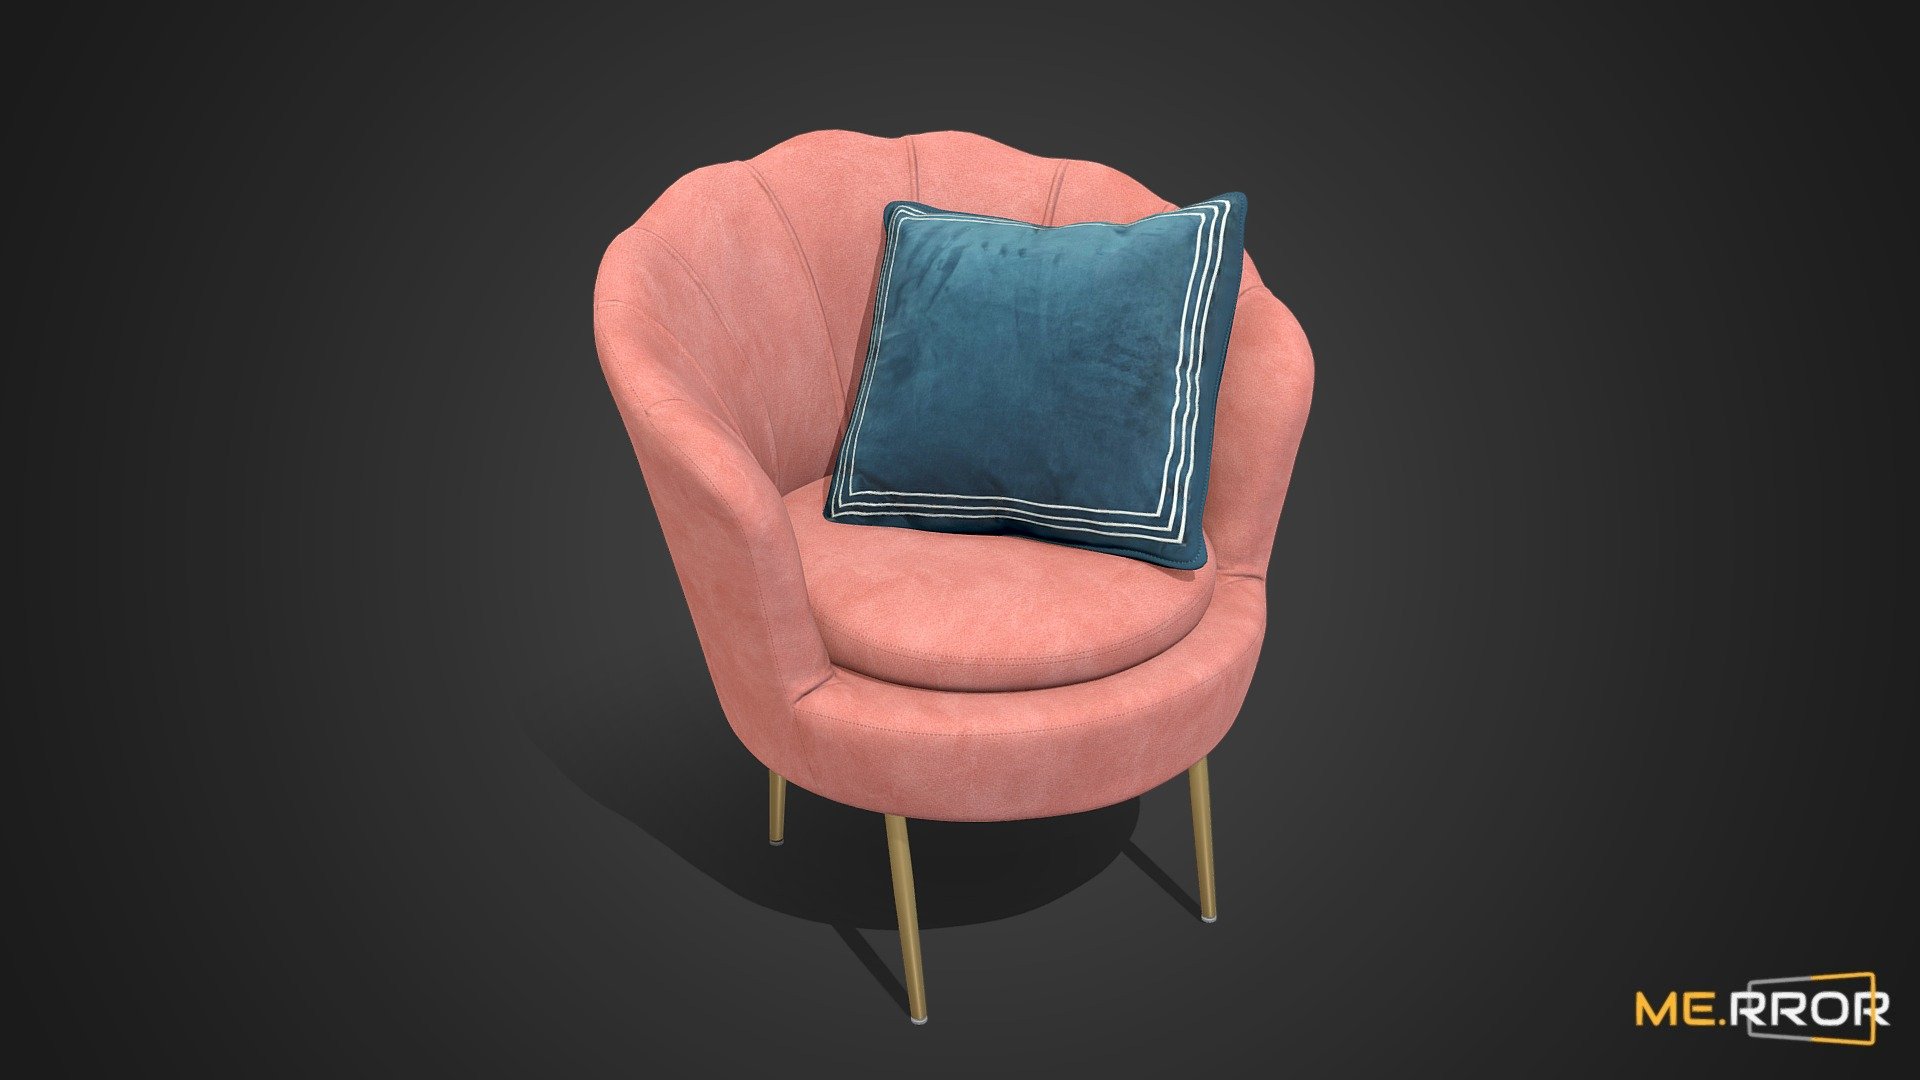 MERROR is a 3D Content PLATFORM which introduces various Asian assets to the 3D world


3DScanning #Photogrametry #ME.RROR - [Game-Ready] Pink Sofa - Buy Royalty Free 3D model by ME.RROR Studio (@merror) 3d model